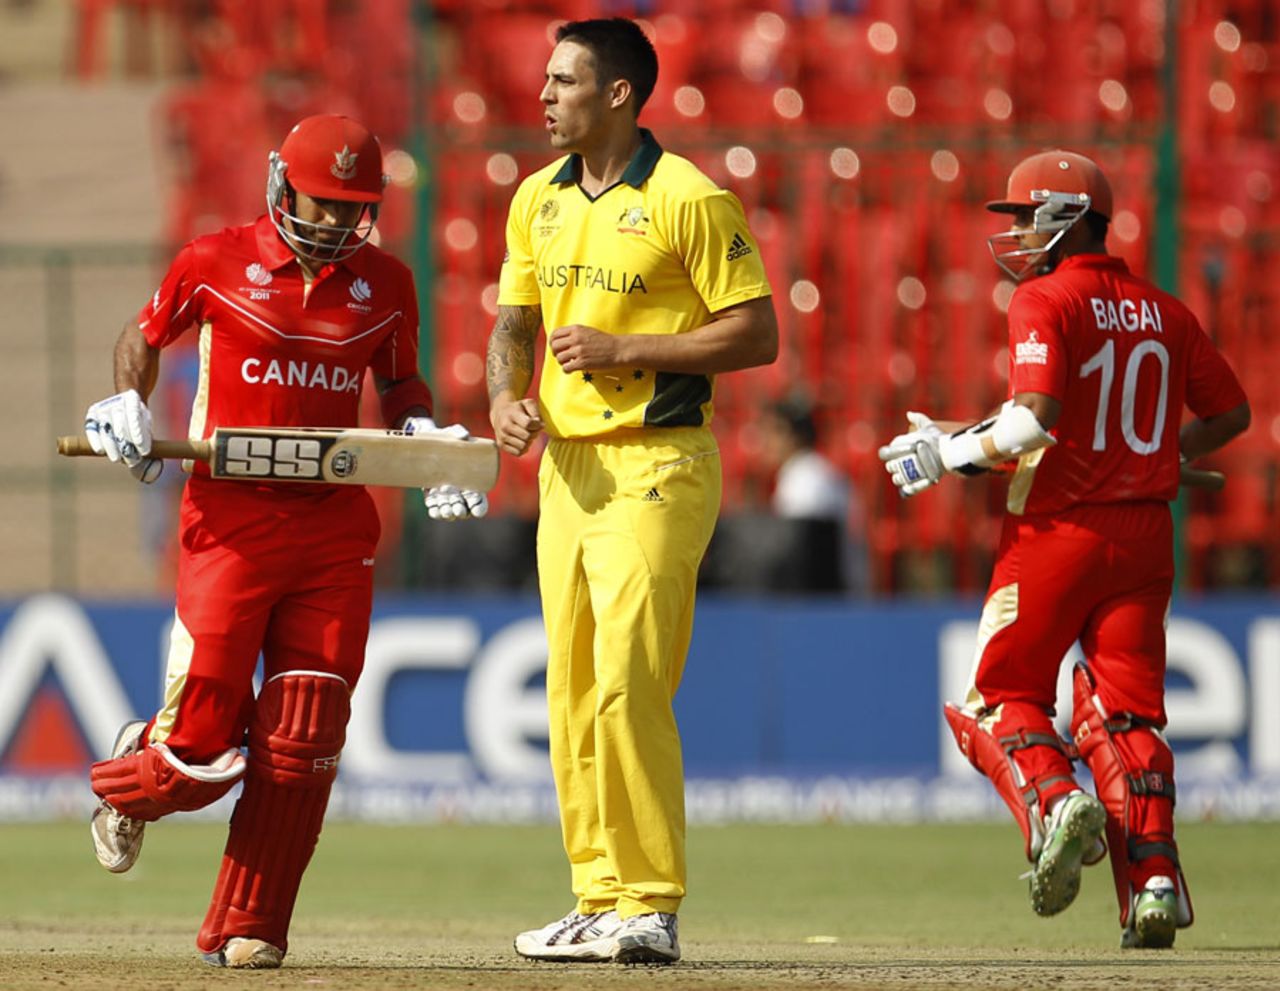 Zubin Surkari and Ashish Bagai put on 68 for the third-wicket, Australia v Canada, Group A, World Cup, Bangalore, March 16, 2011